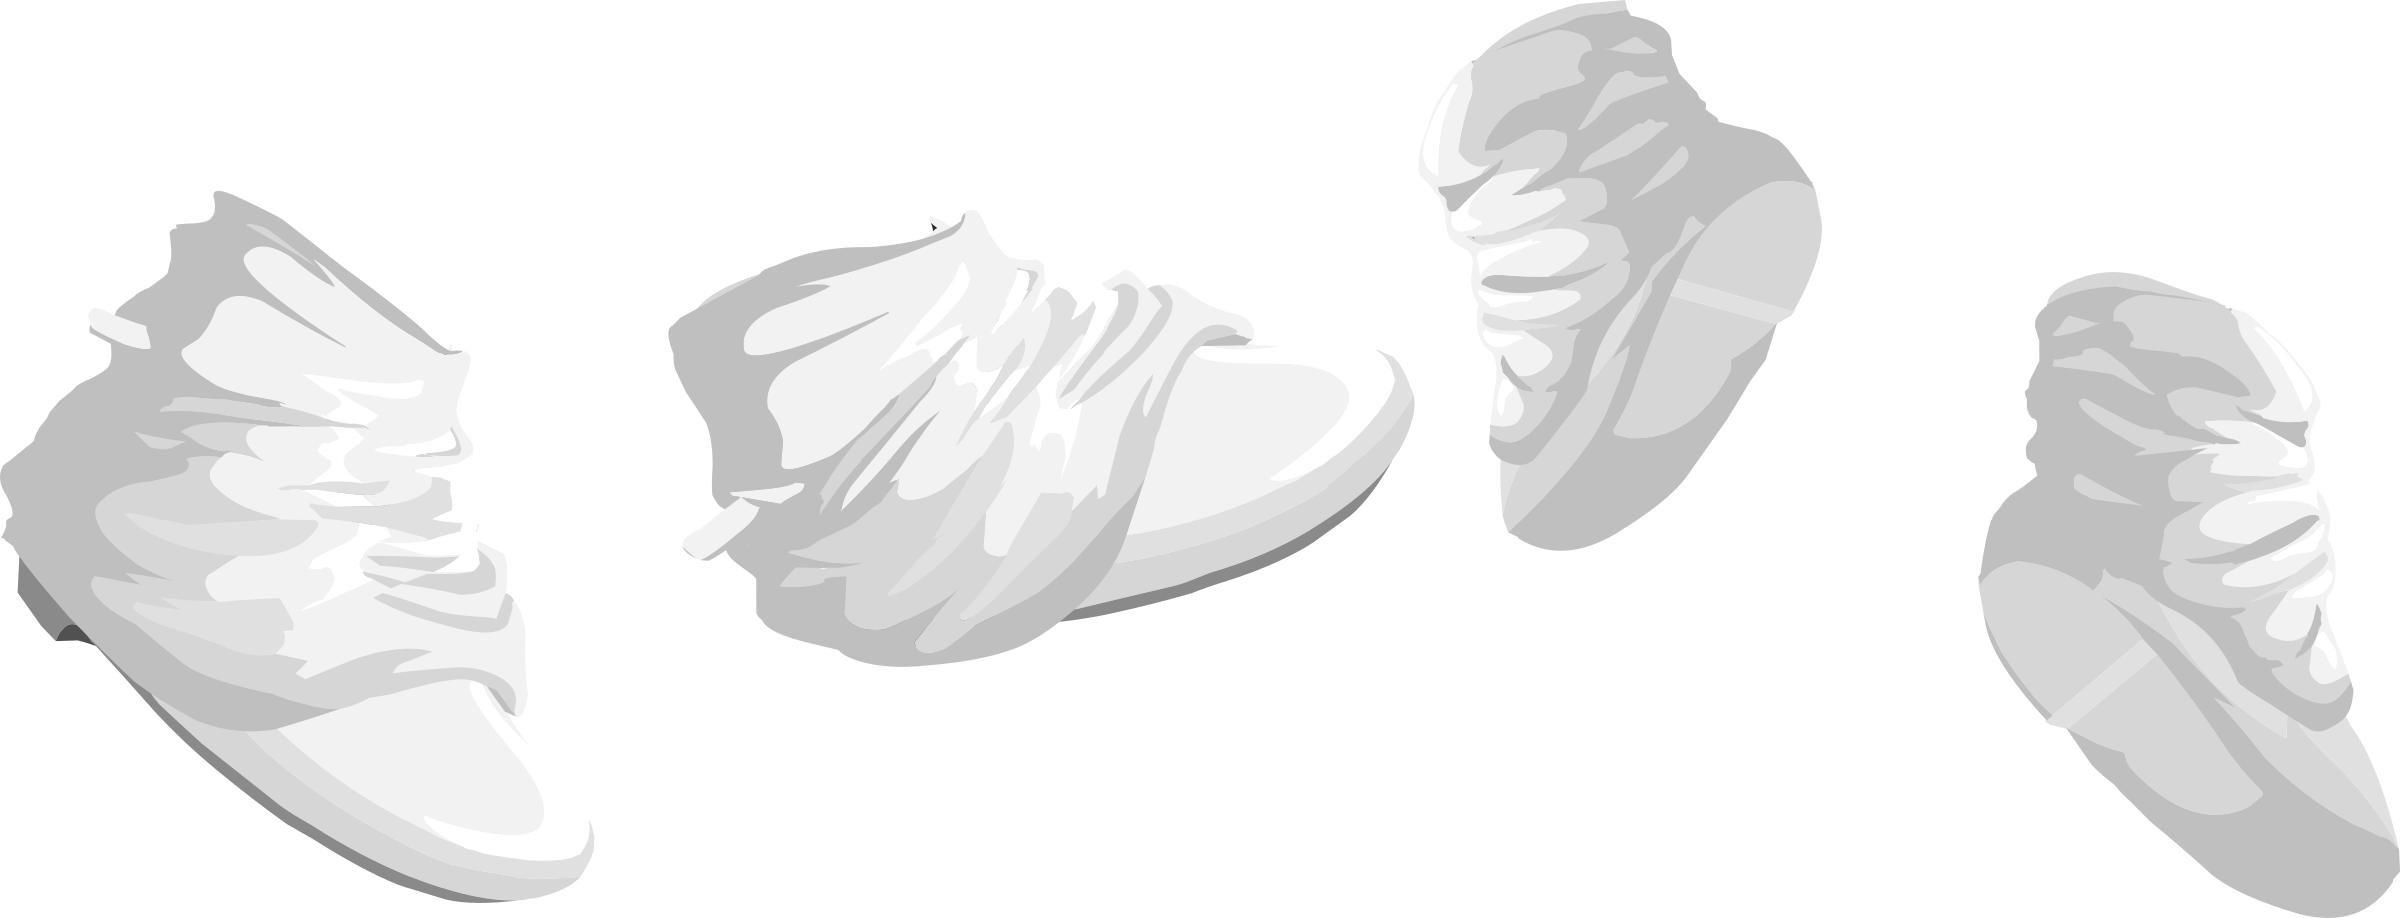 Avatar Wardrobe Shoes Slouch Boots PNG icons